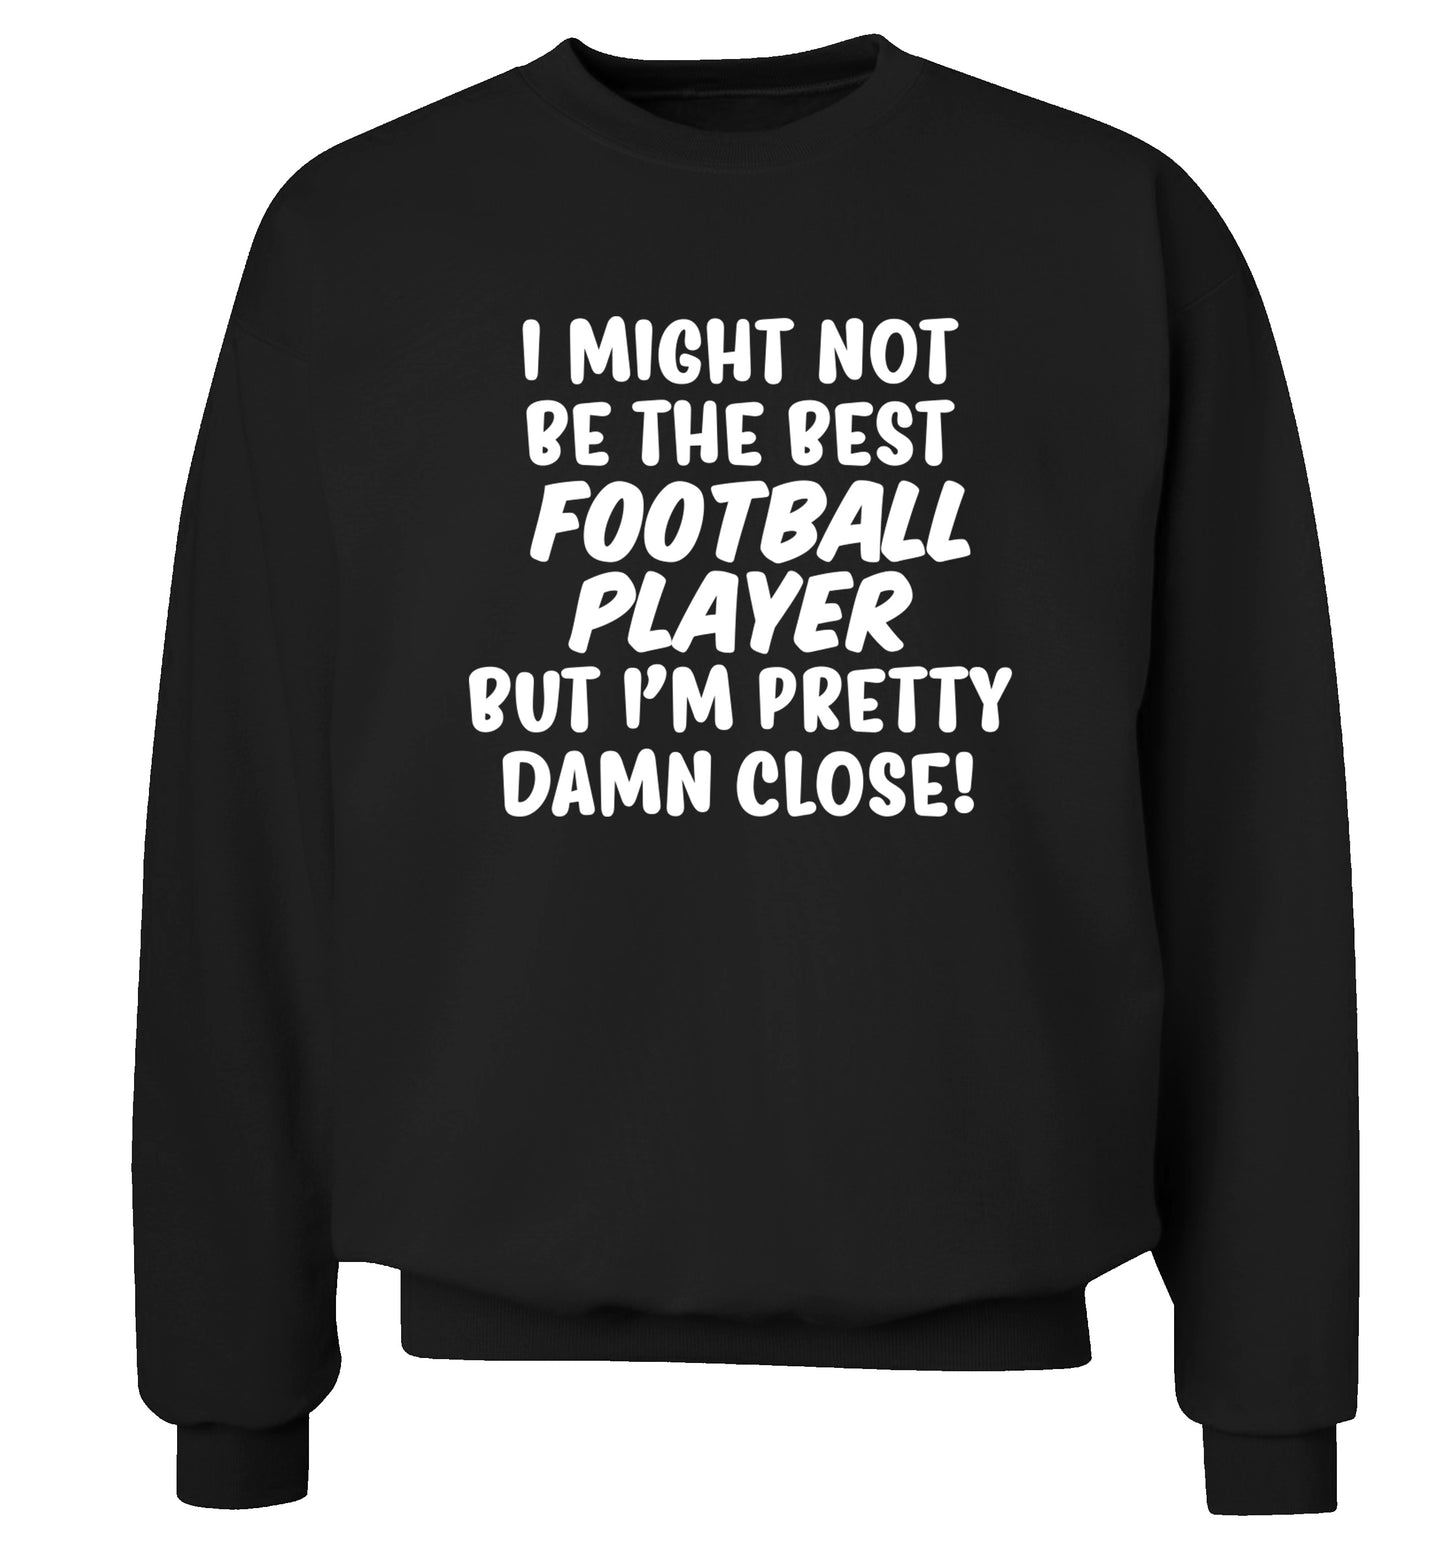 I might not be the best football player but I'm pretty close! Adult's unisexblack Sweater 2XL